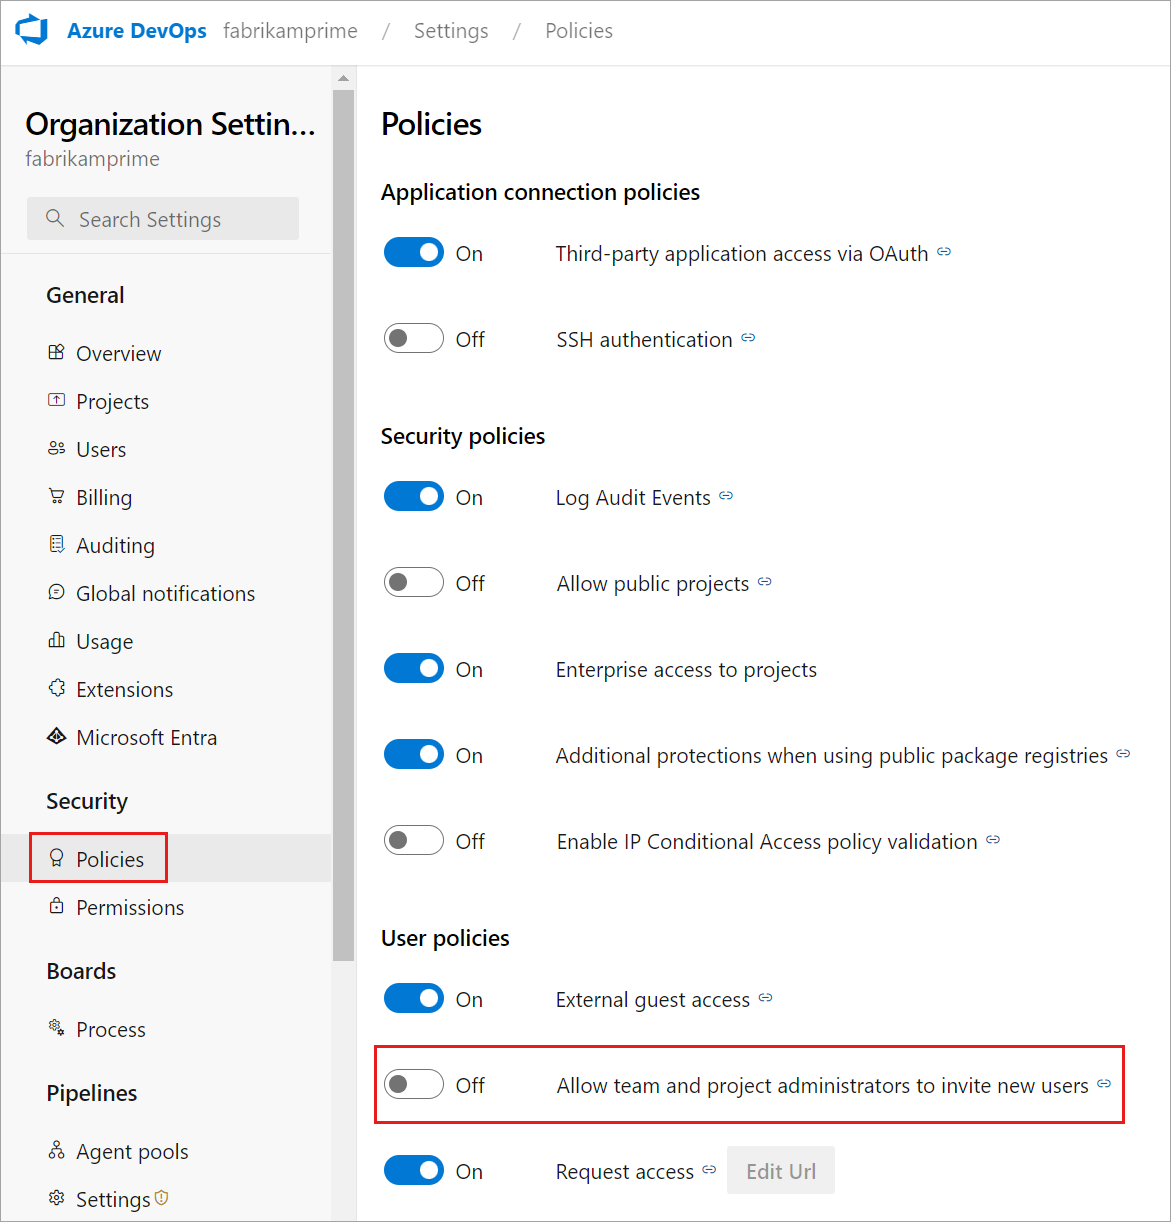 Turn policy off to limit Team and Project administrators from inviting new users